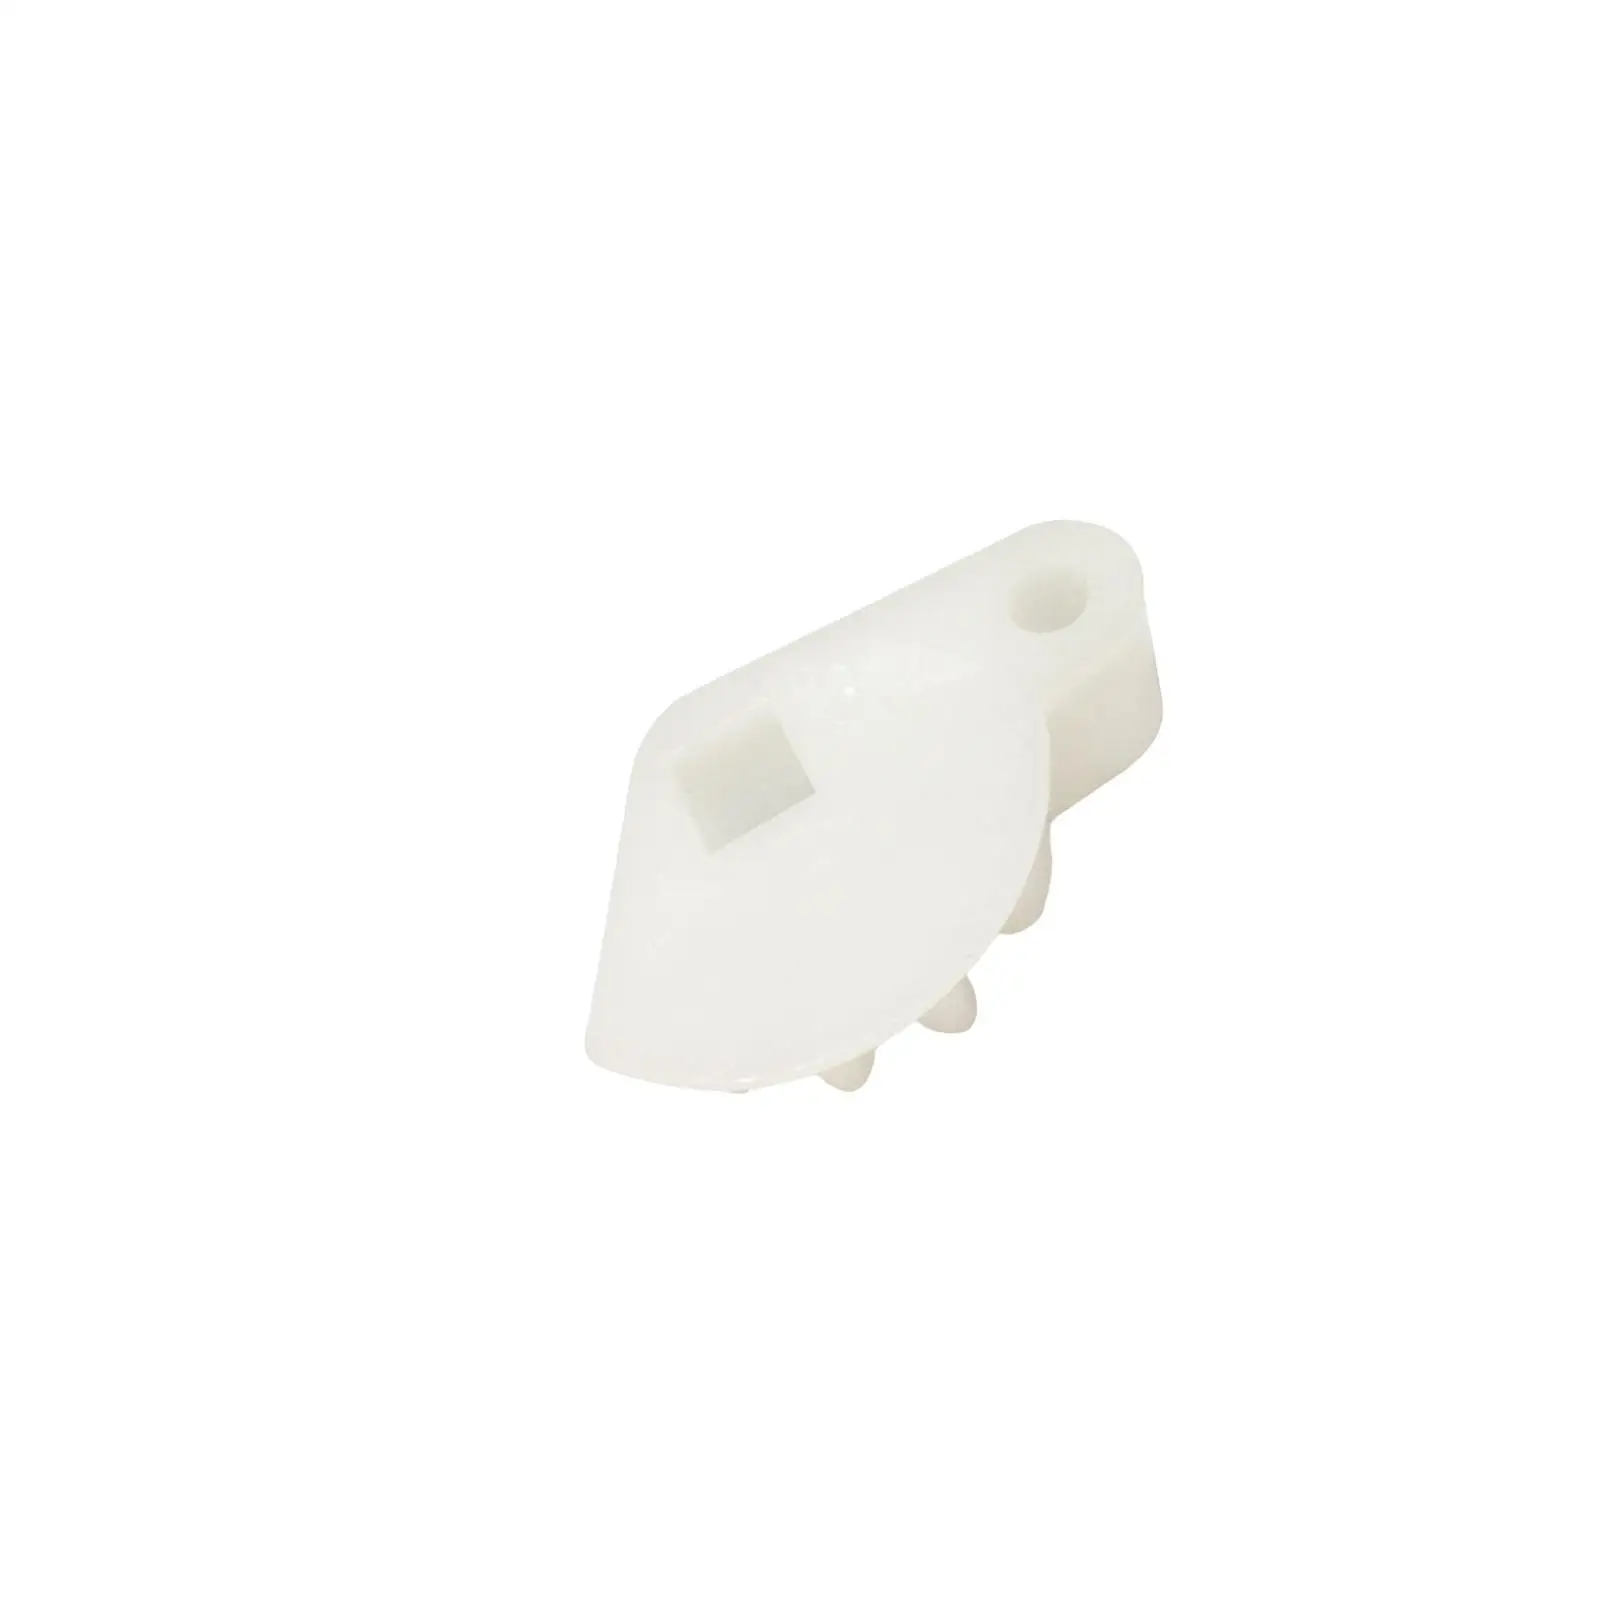 Shift Rod Lever 3B2-66225 for Tohatsu Outboard Motor Direct Replacement White Vehicle Spare Parts Easily Install